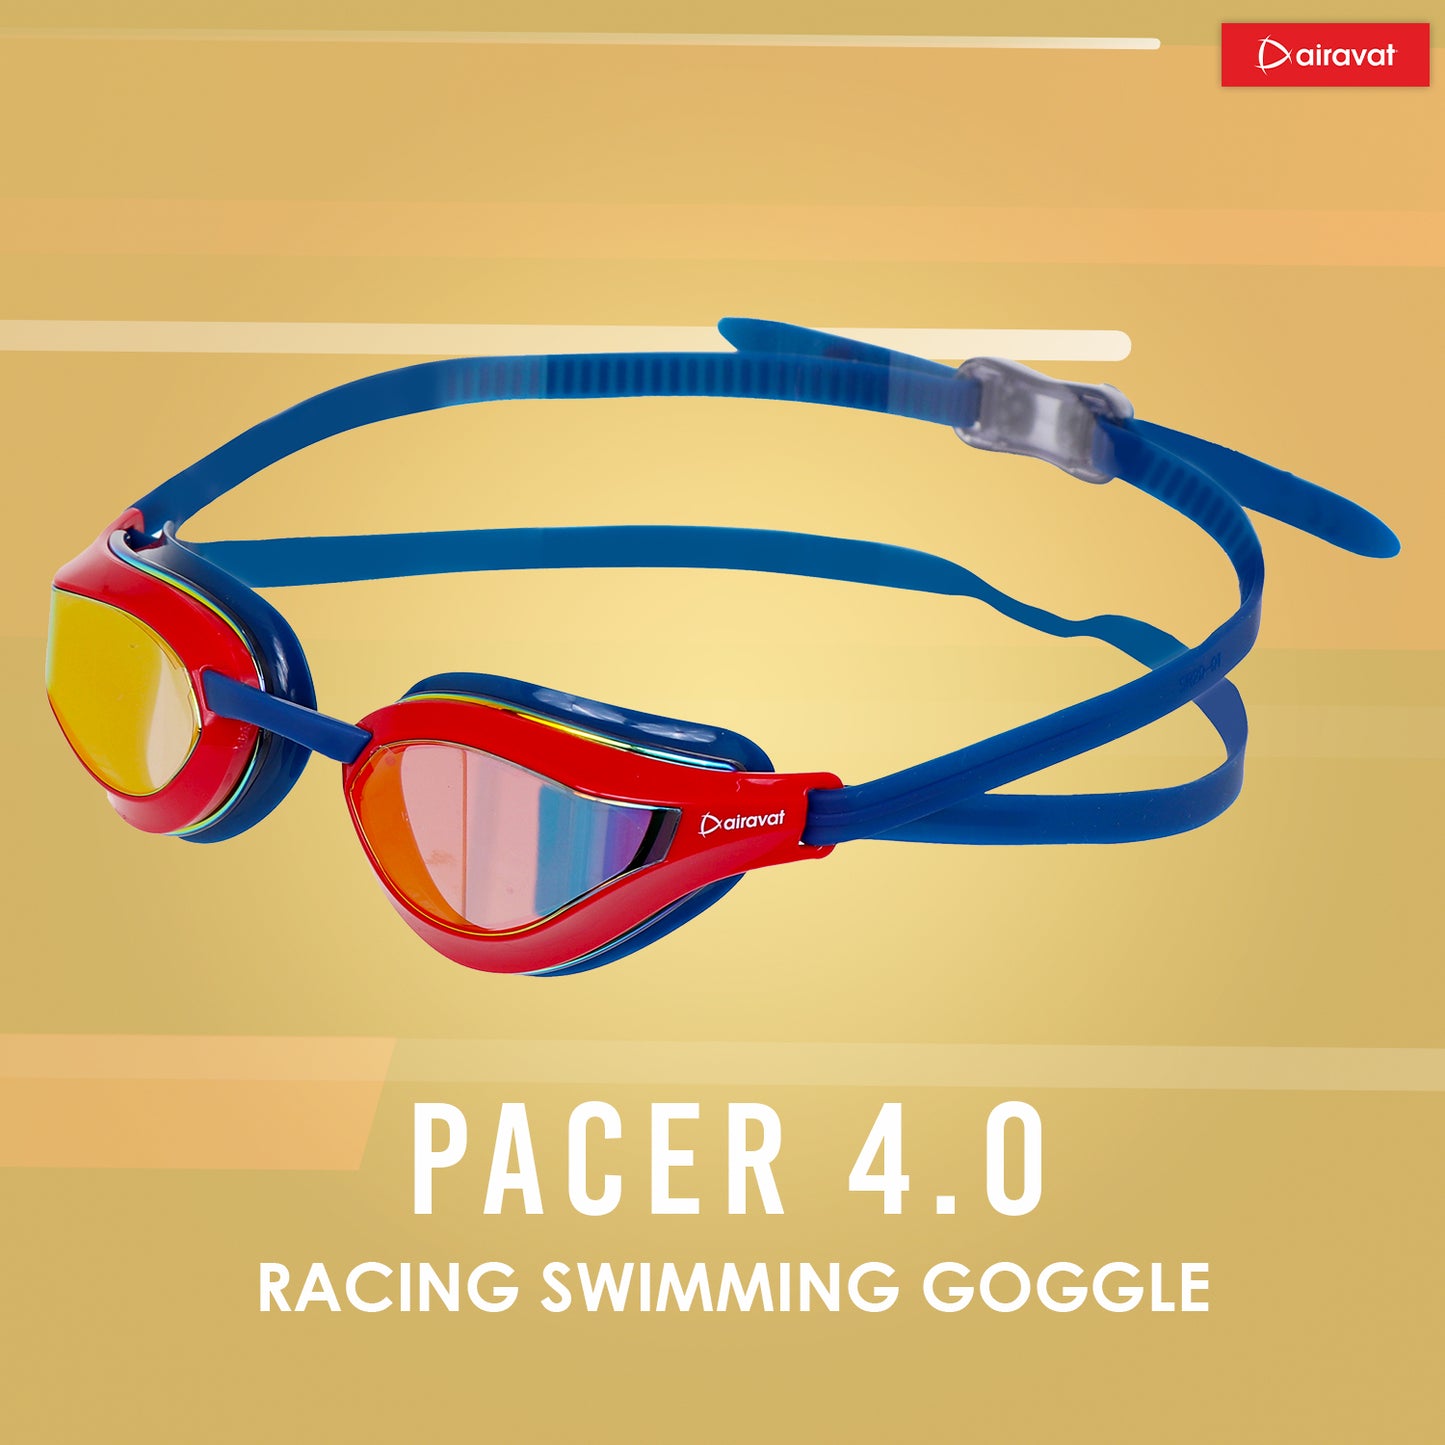 PACER 4.0